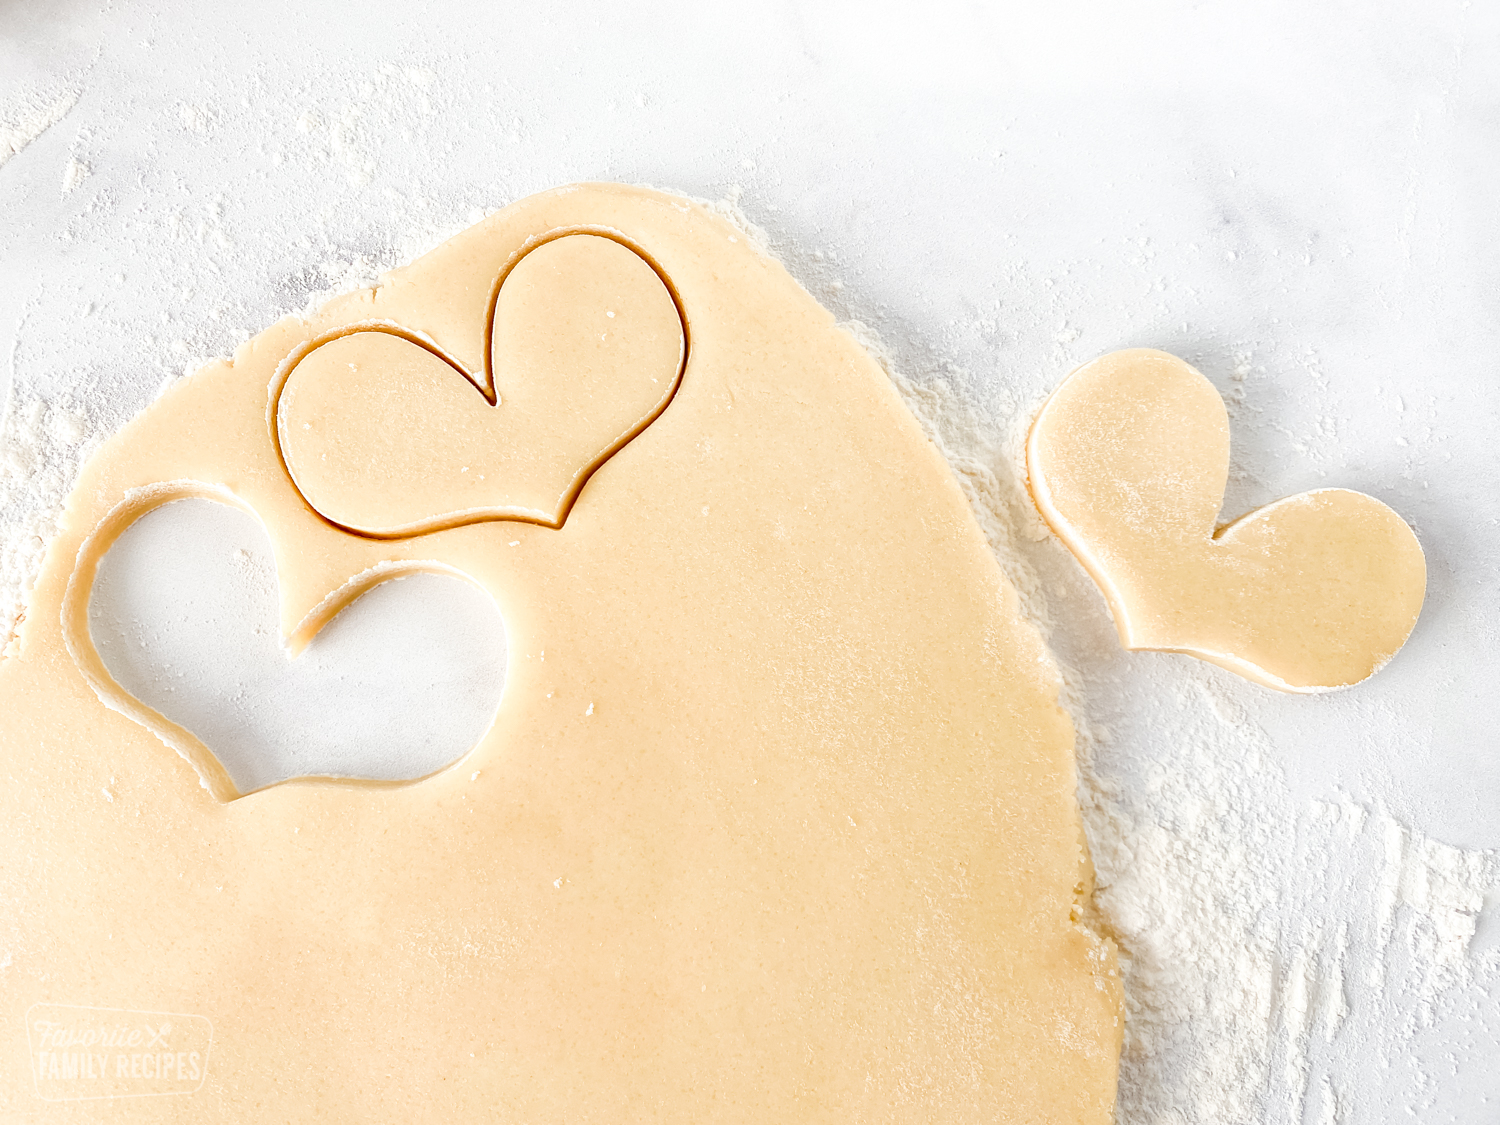 Sugar cookie dough with cut out hearts